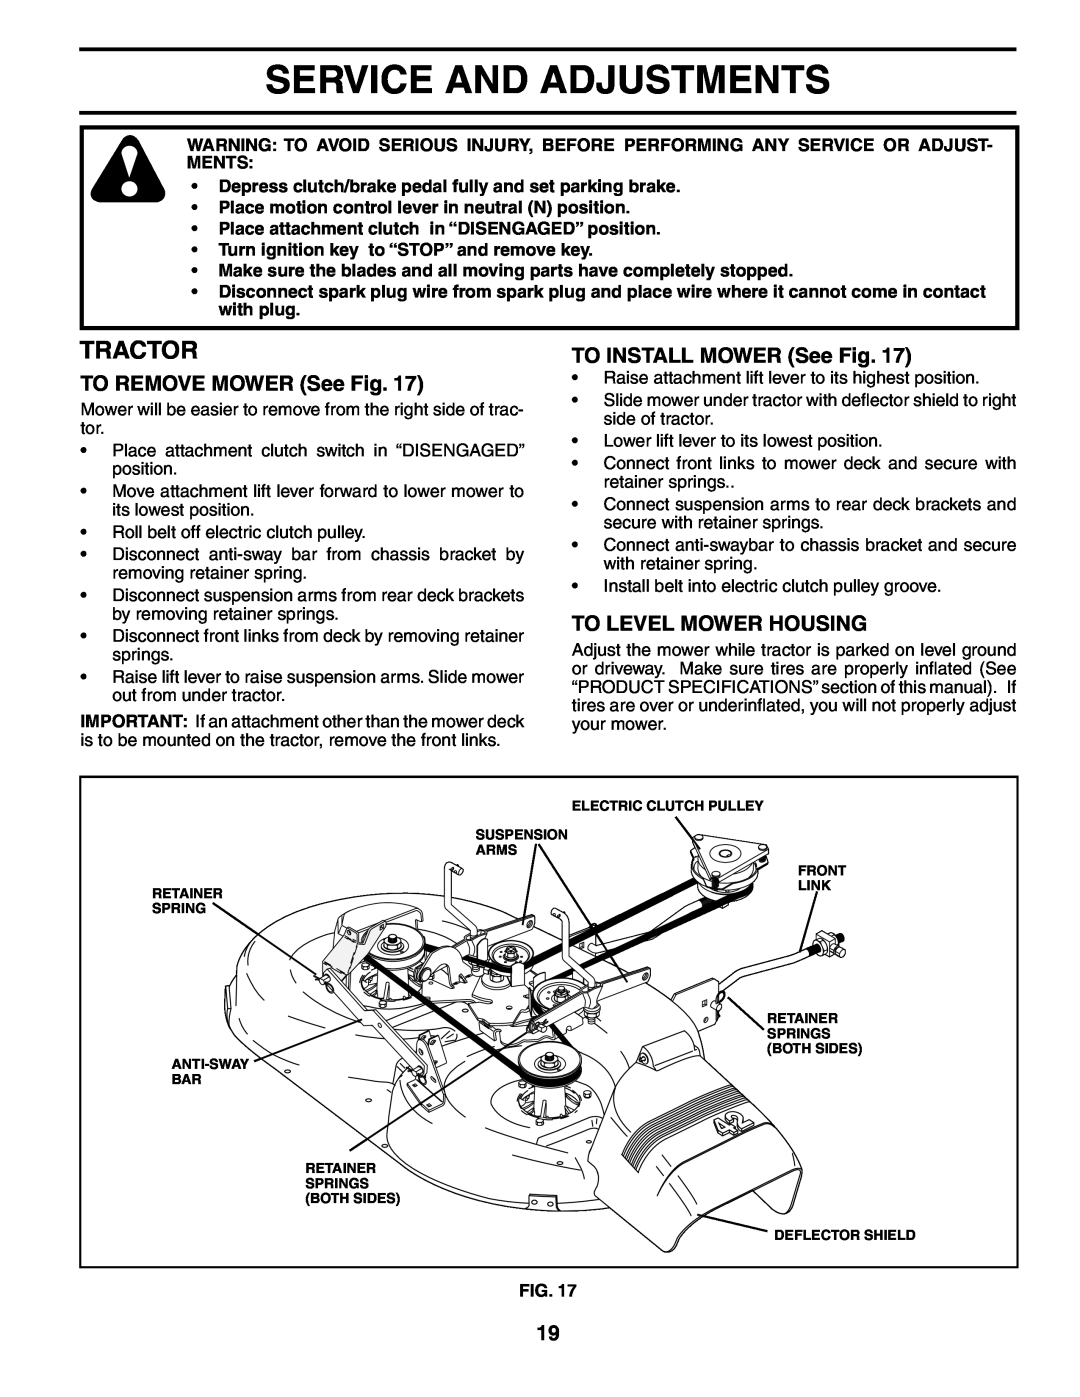 Poulan 195021 Service And Adjustments, TO REMOVE MOWER See Fig, TO INSTALL MOWER See Fig, To Level Mower Housing, Tractor 